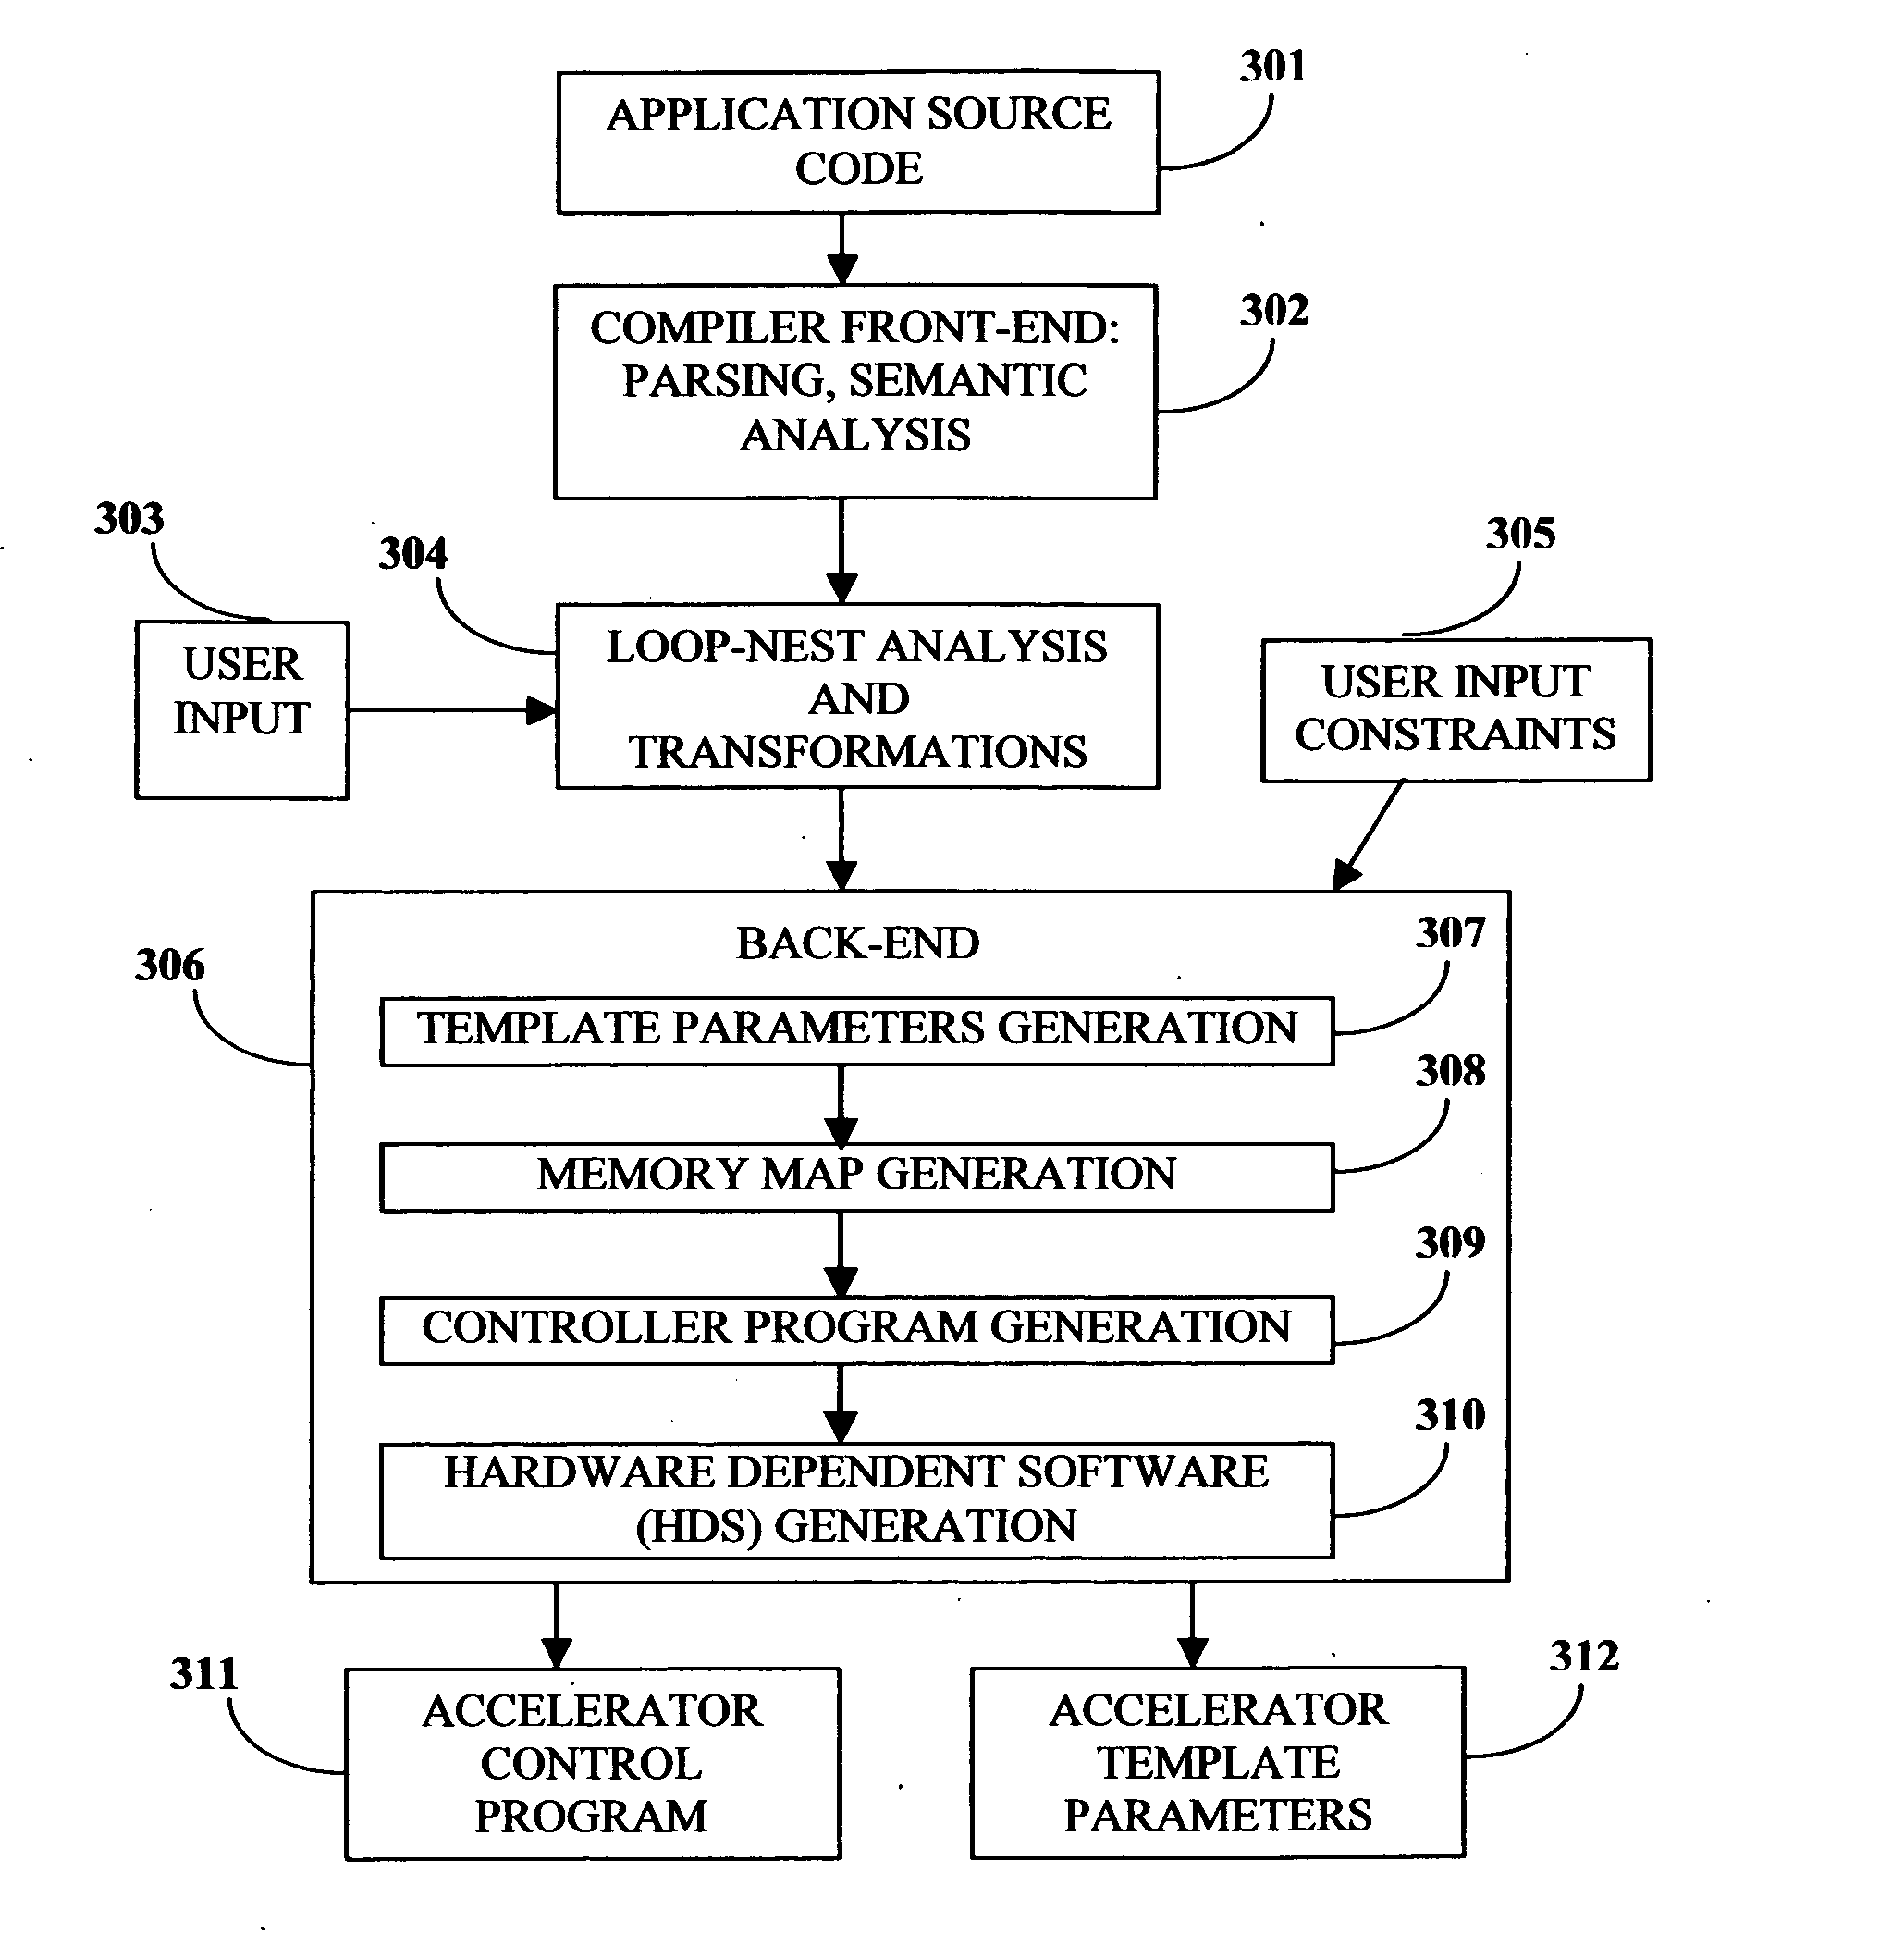 Compiler method for extracting and accelerator template program